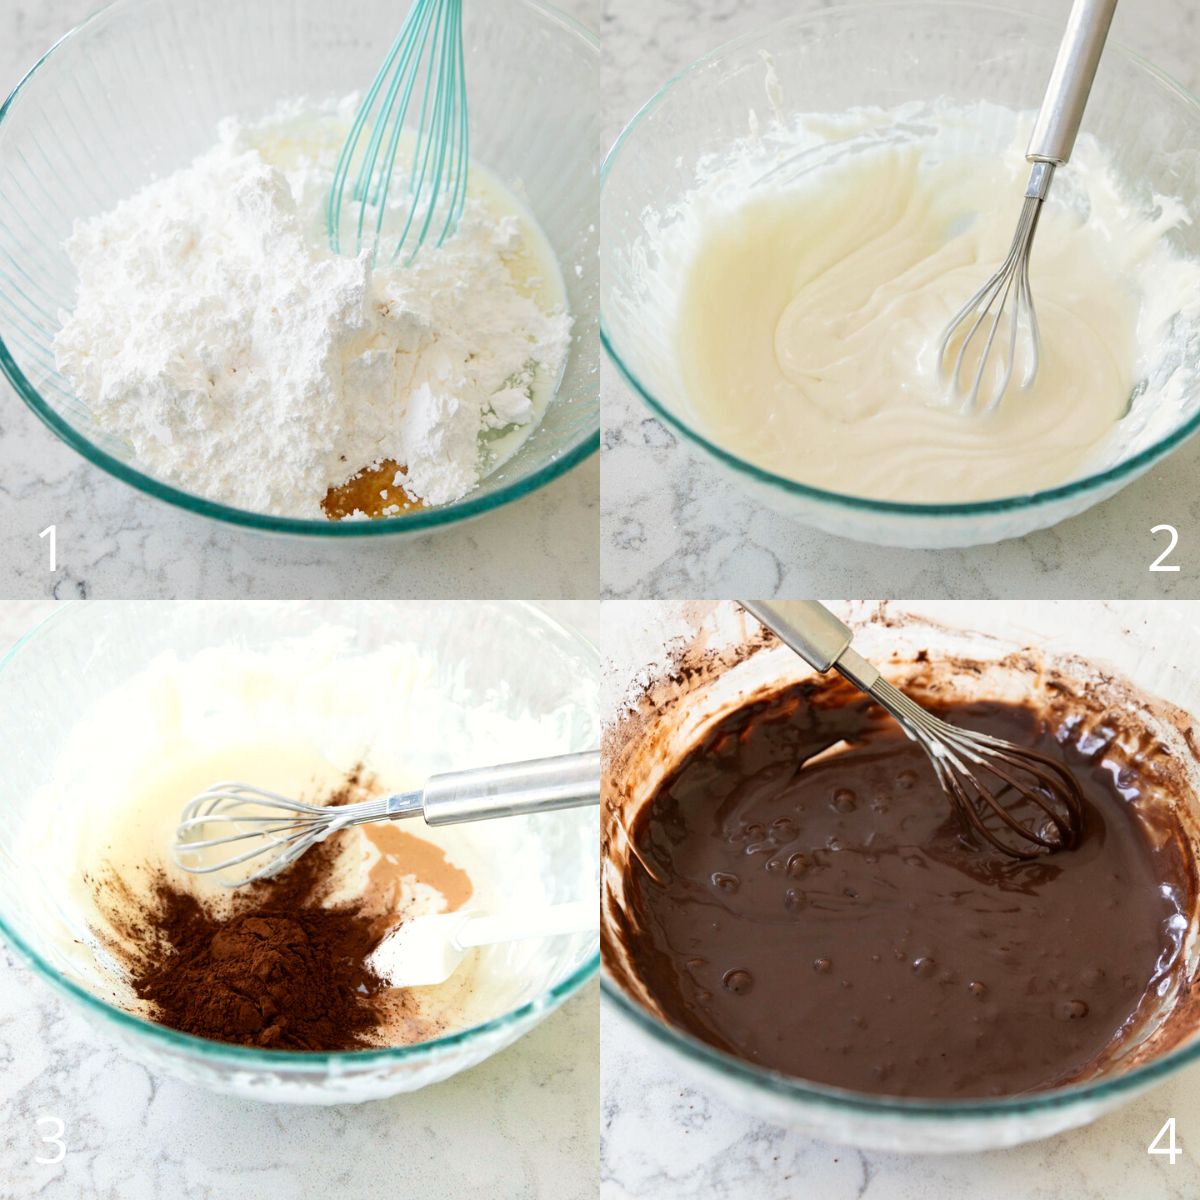 The step by step photos show how to make the black and white icing.